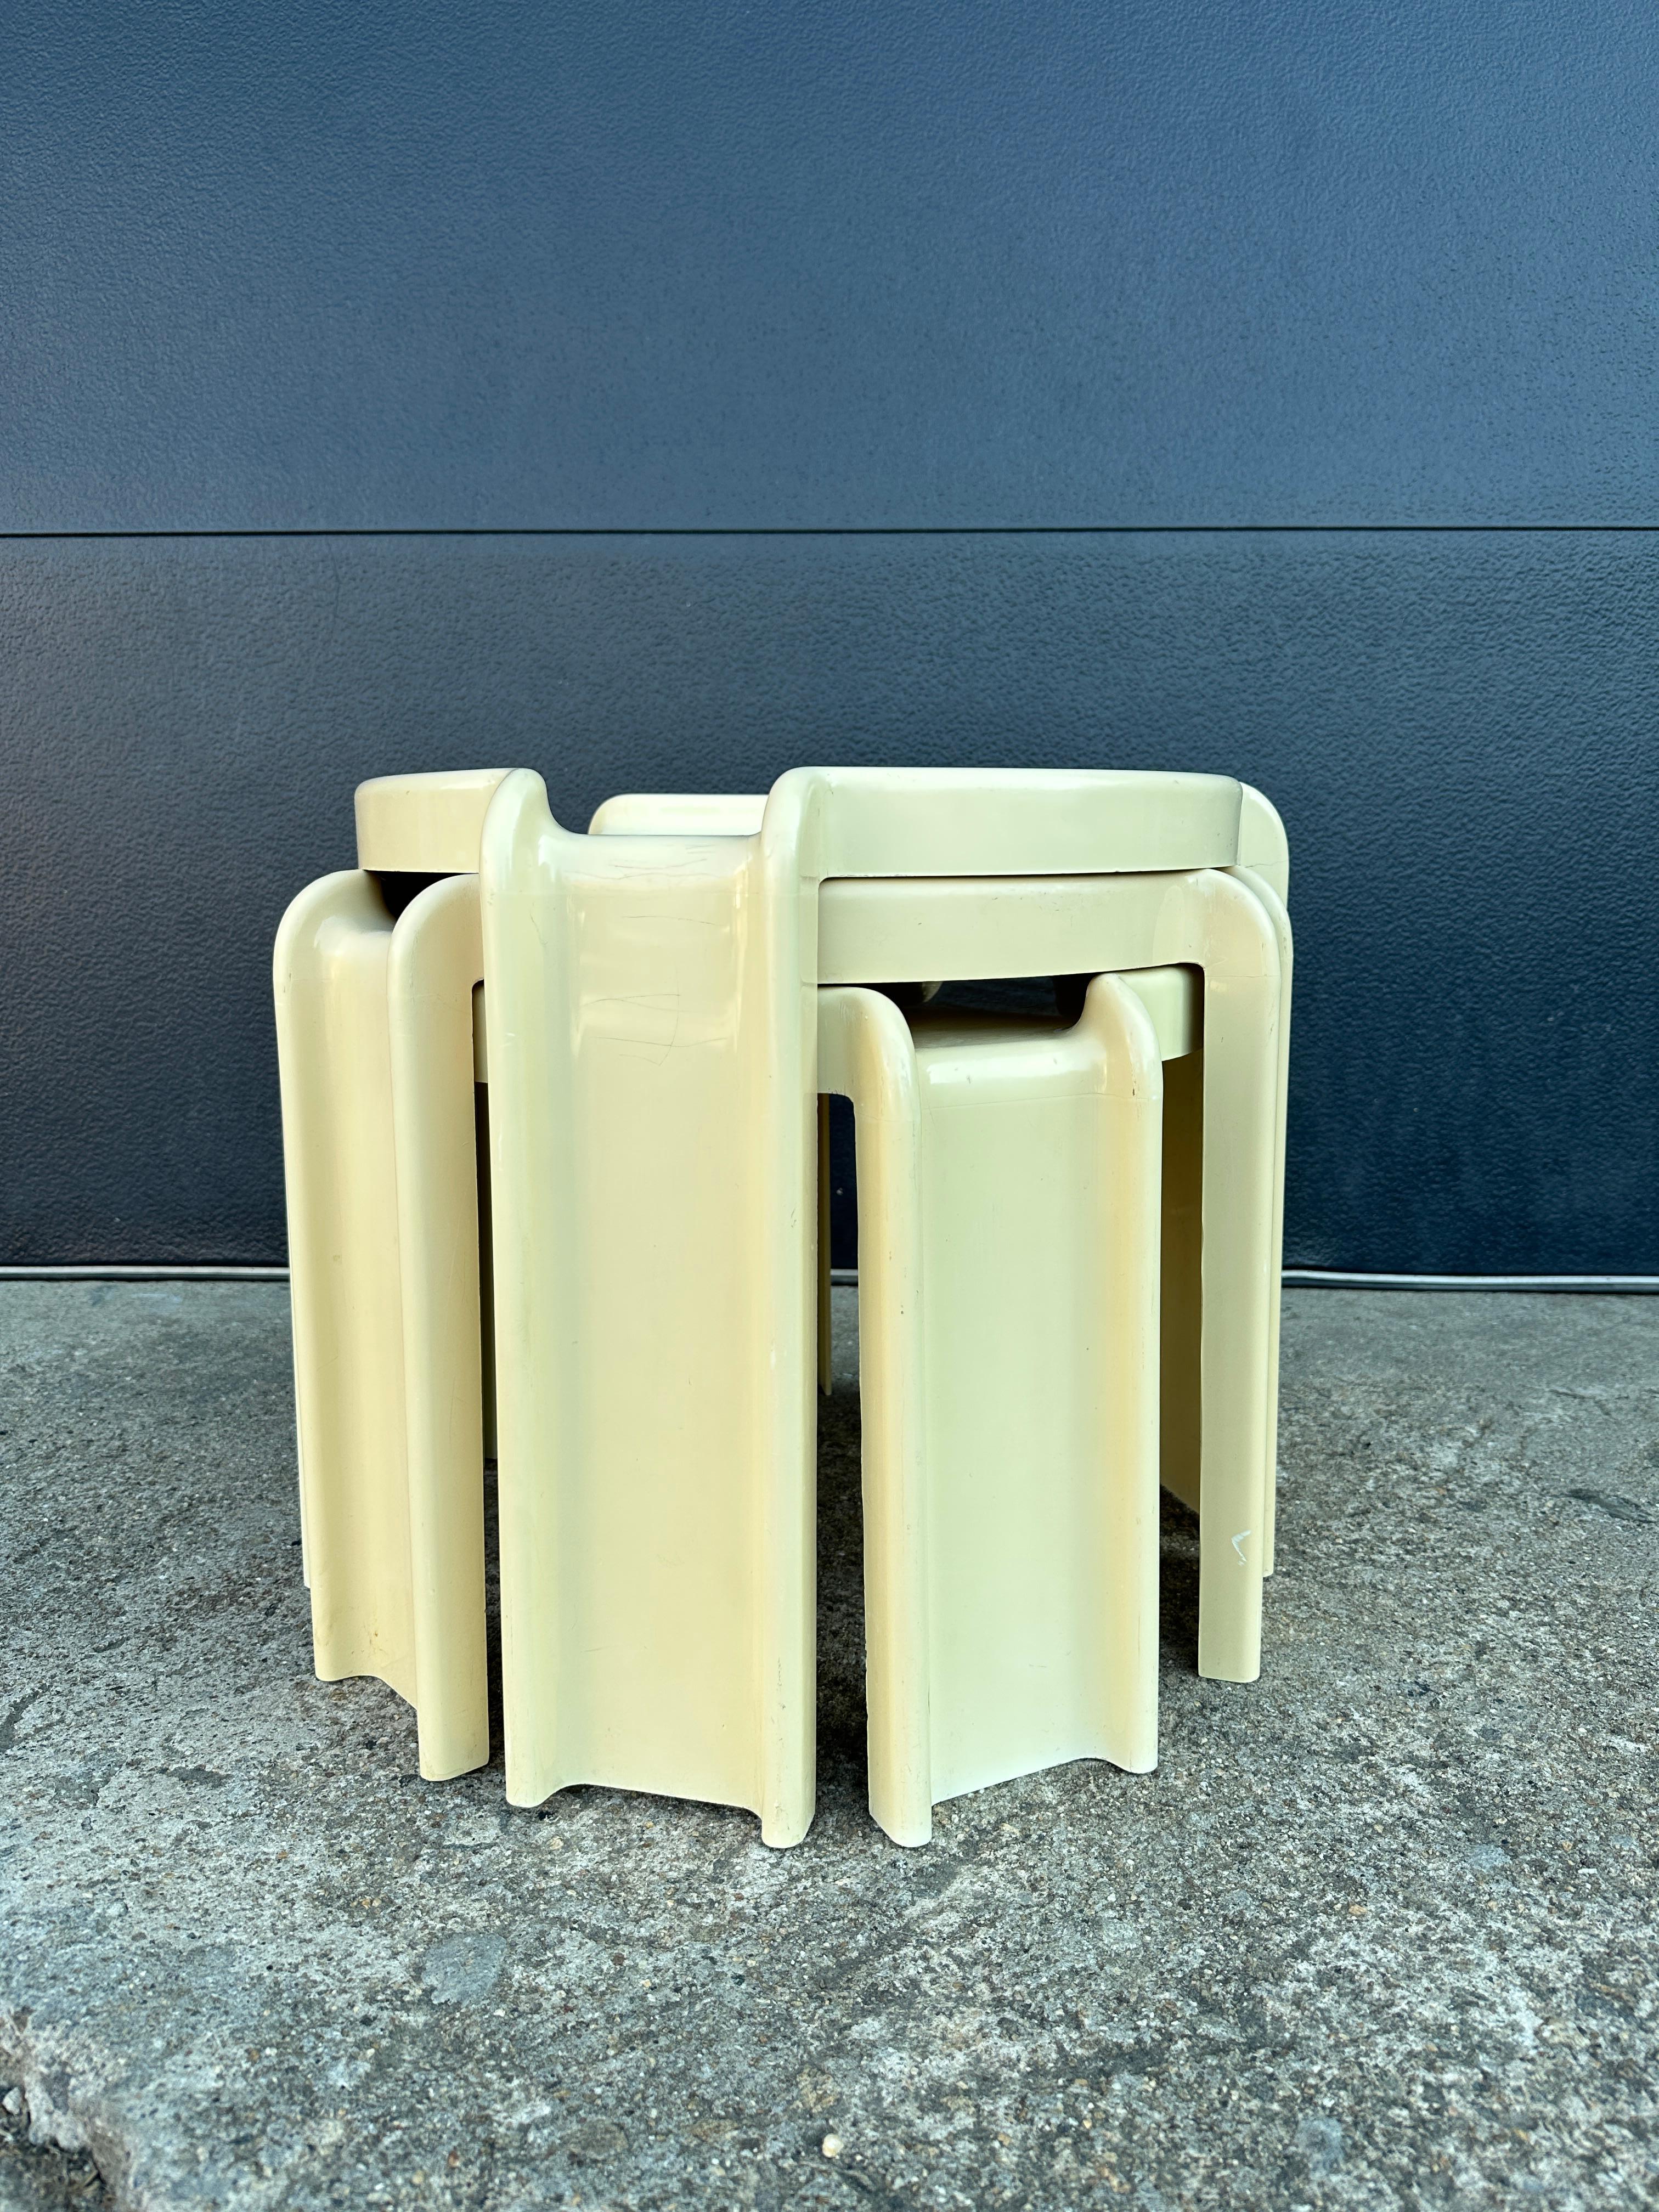 Vintage nesting tables designed by Giotto Stoppino for Kartell, Italy. Three tables in total manufactured in molded ivory plastic.

Large 16.70 Diameter x 16”H

Medium 16.70 Diameter x 14.5”H

Small 16.70 Diameter x 13”H.